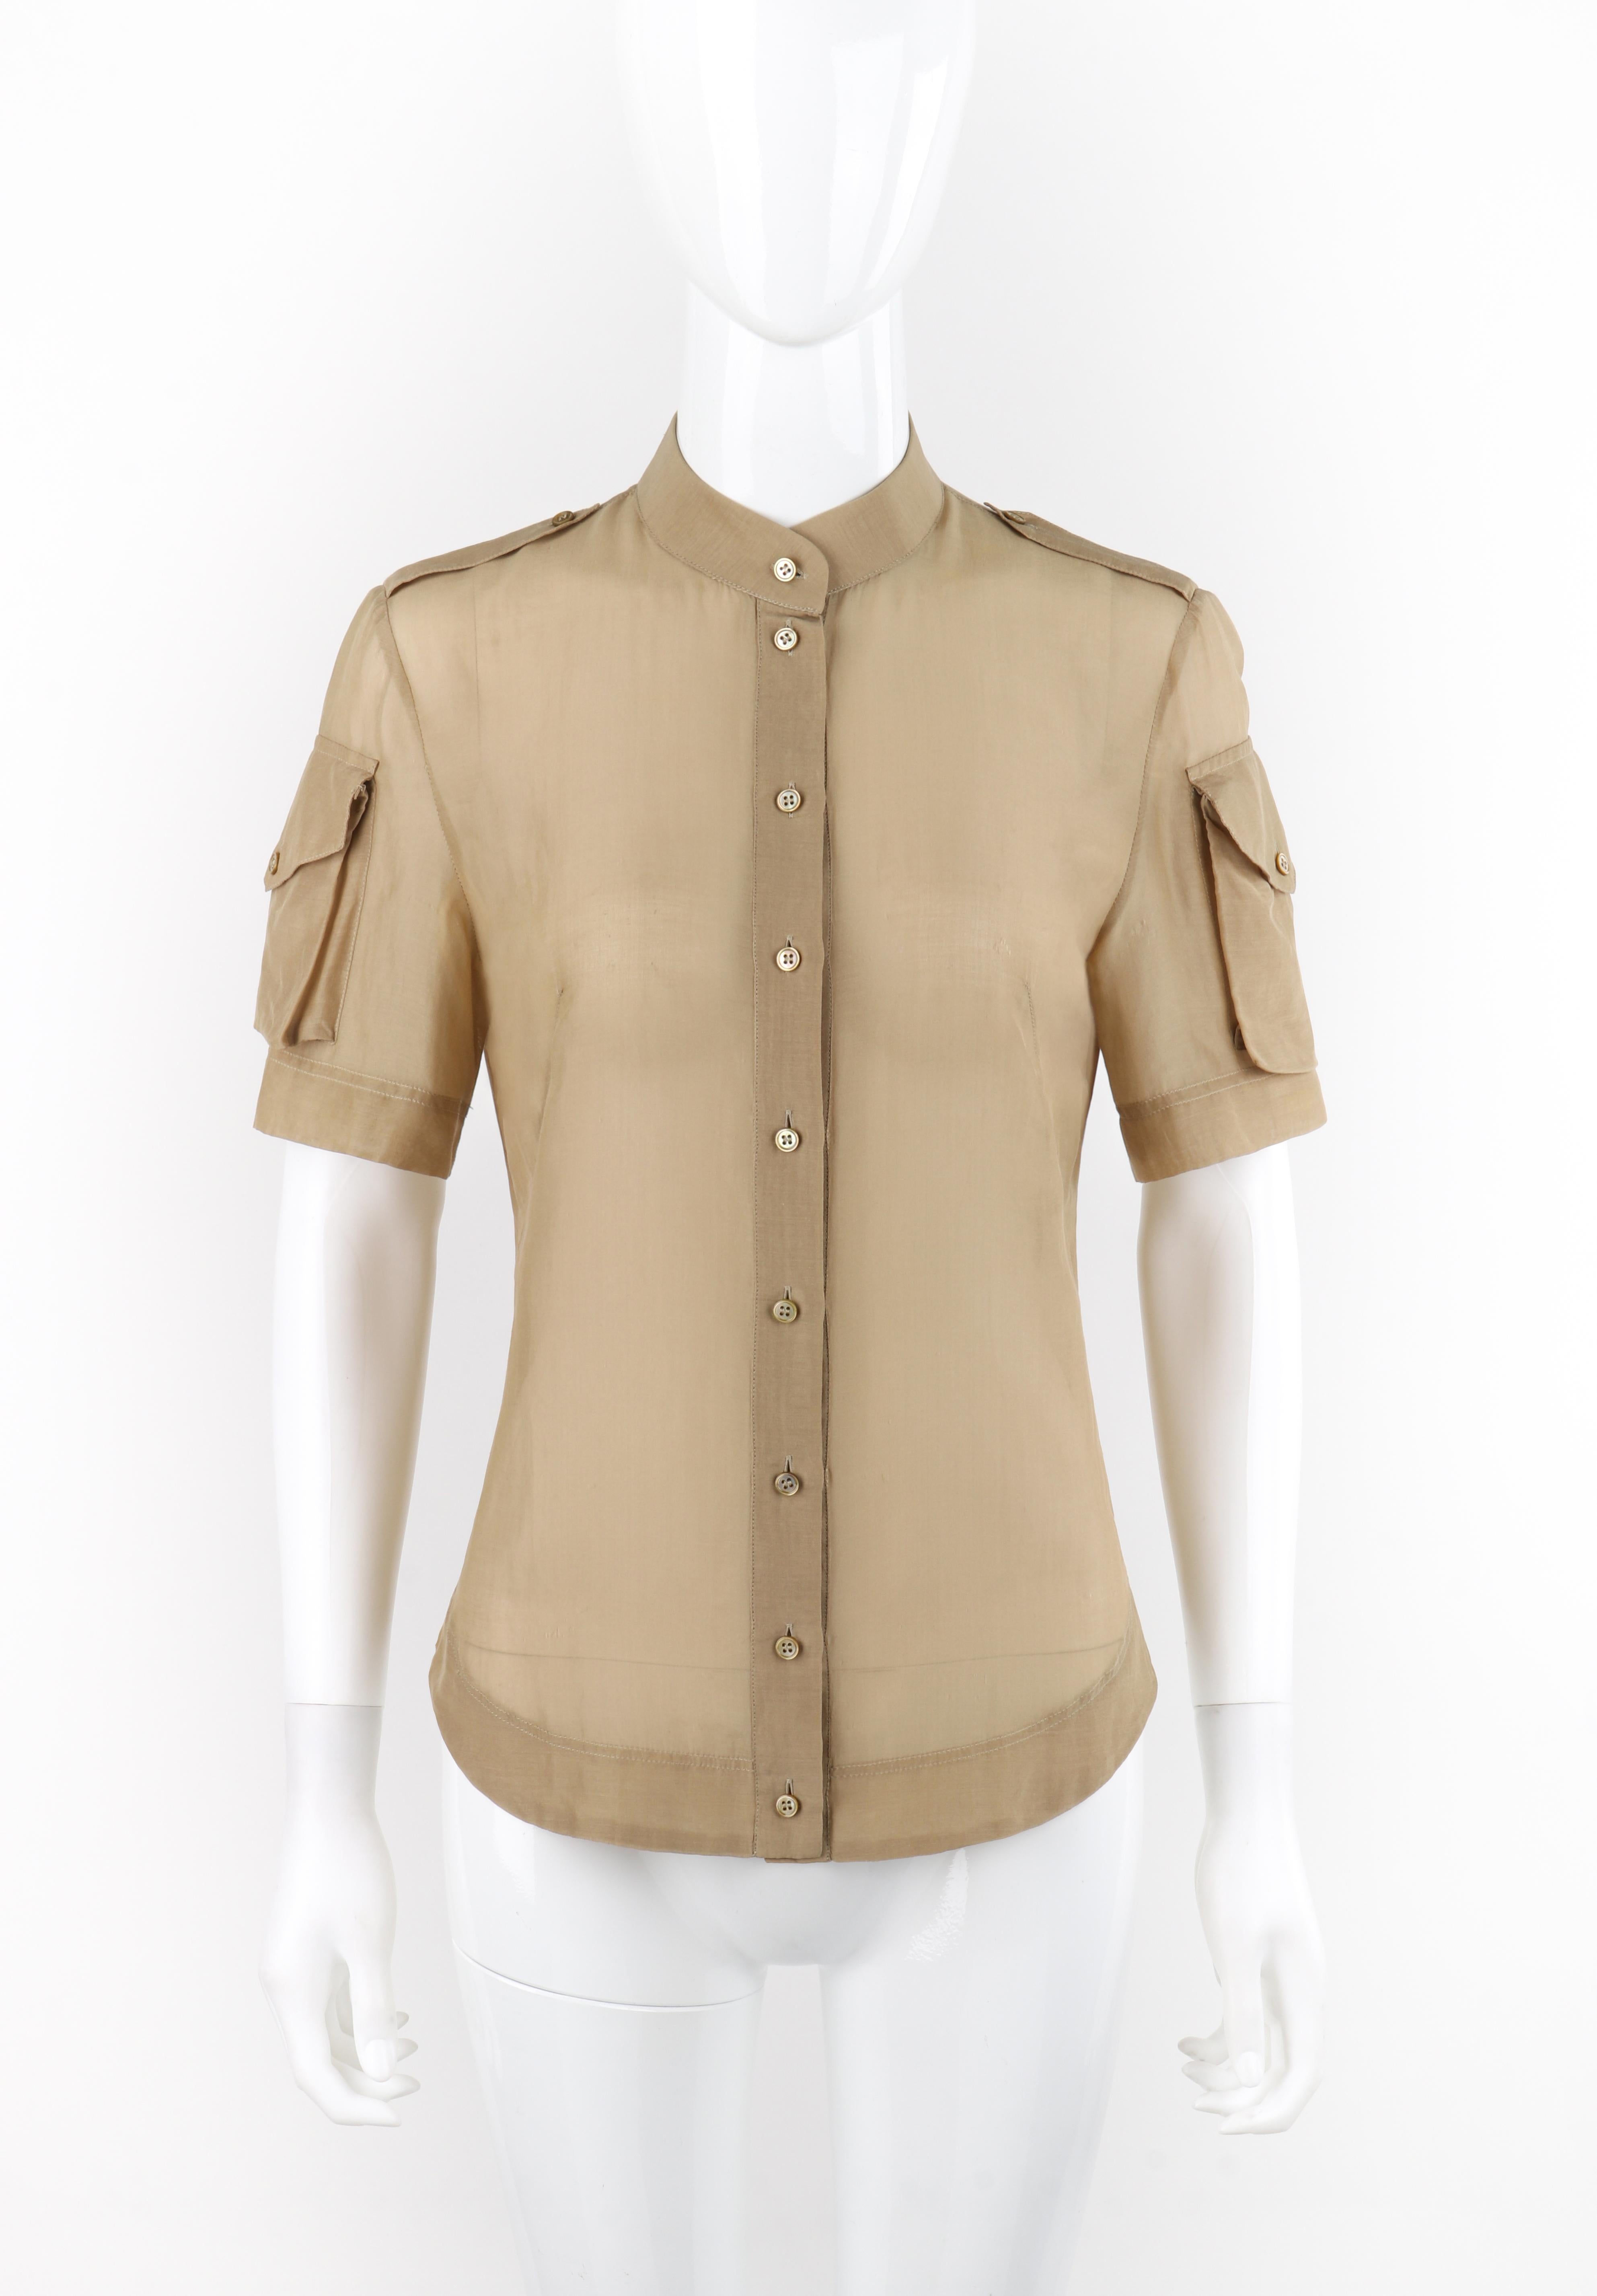 Brand / Manufacturer: Alexander McQueen
Collection: S/S 2009
Designer: Alexander McQueen
Style: Button-down top
Color(s): Shades of tan
Lined: No
Marked Fabric Content: 